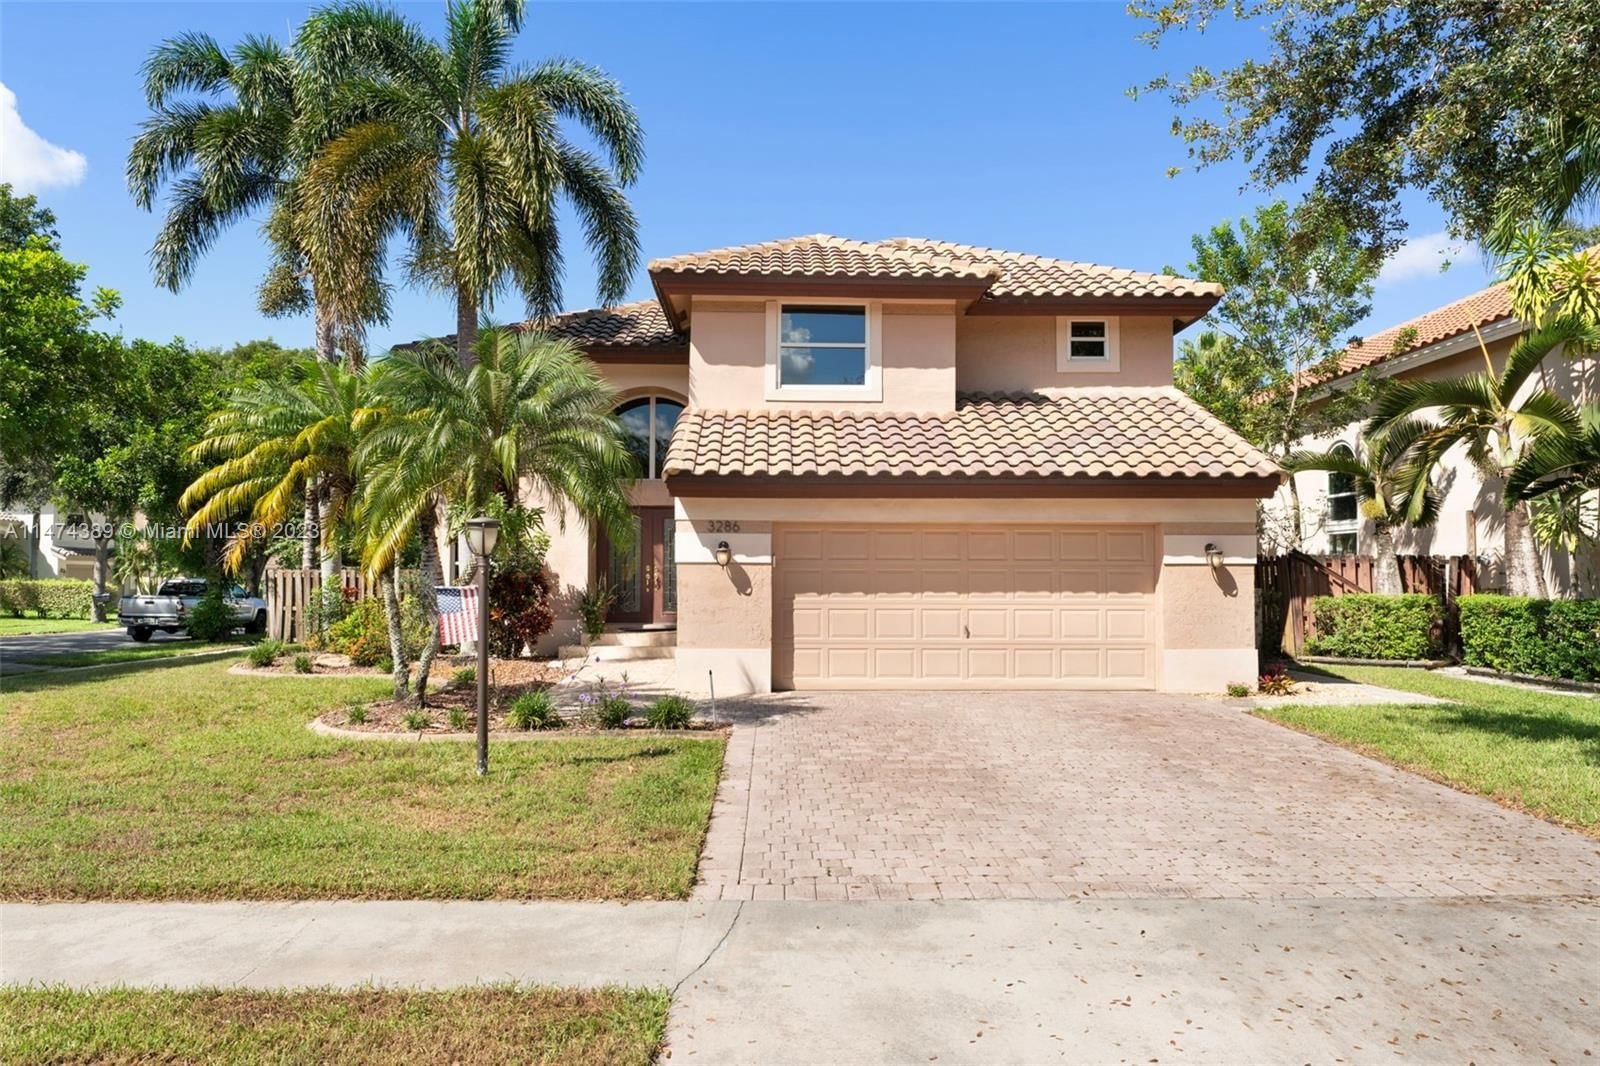 Real estate property located at 3286 Boise Way, Broward County, EMBASSY LAKES PHASE II, Cooper City, FL